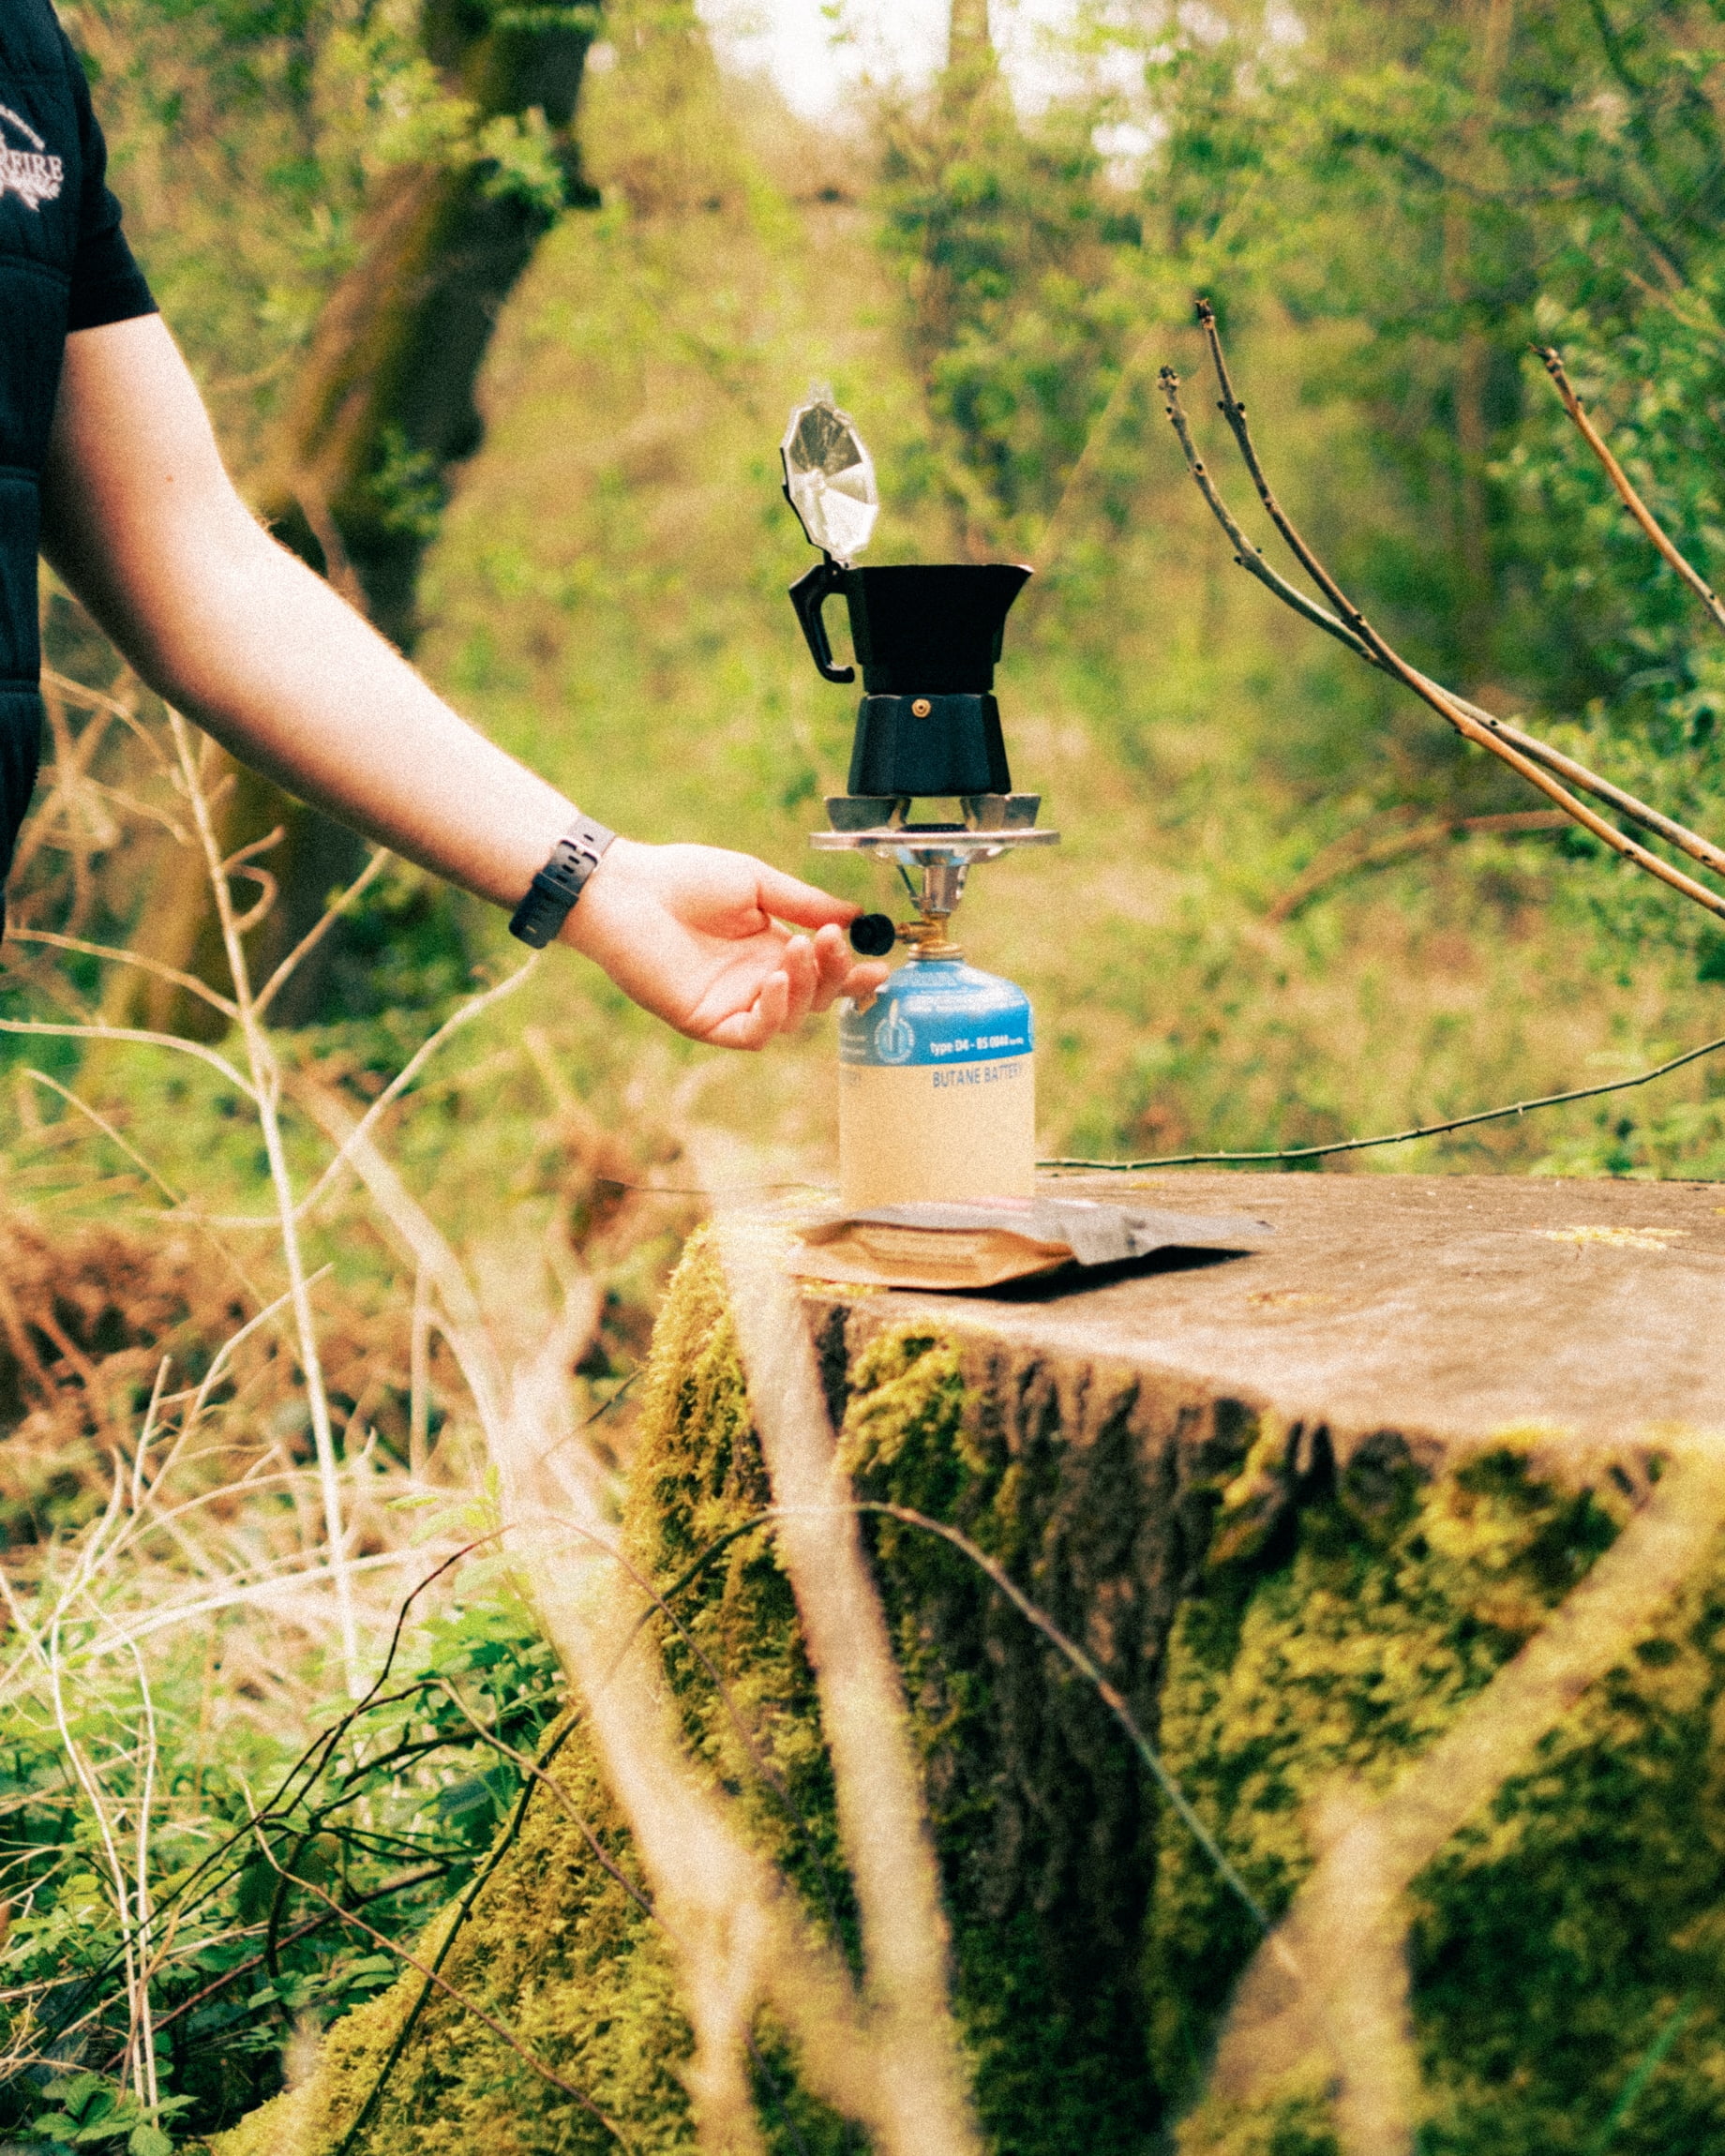 A moka pot sat on a gas stove, which is being lit, on a tree trunk